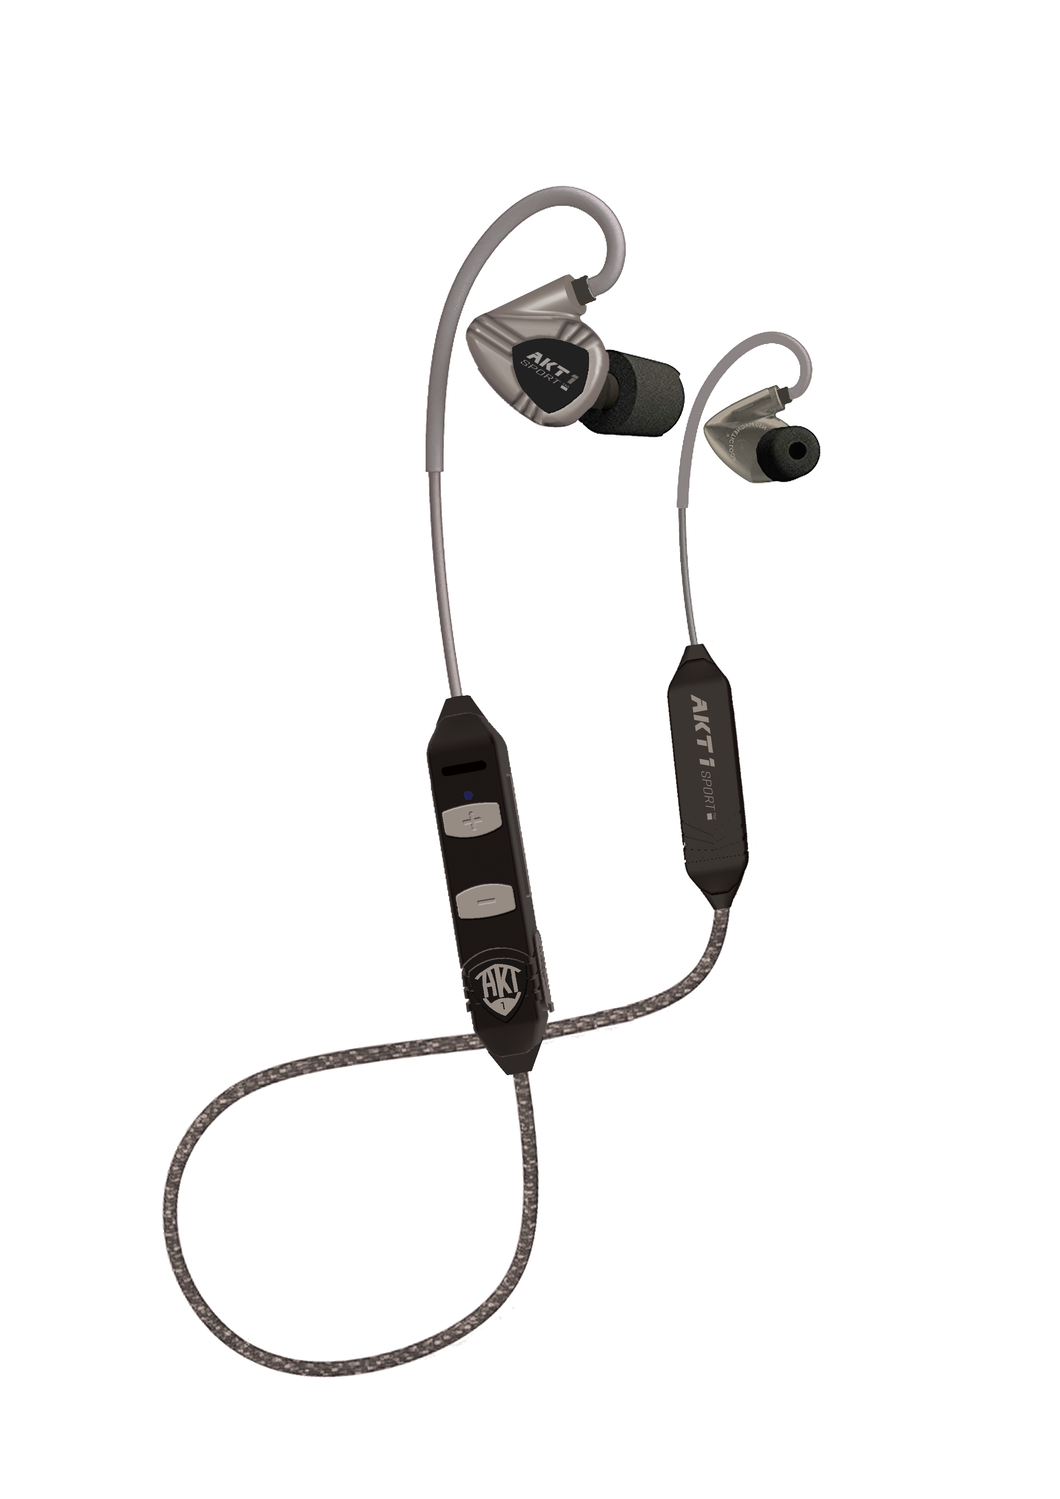 StrikePRO™ HTBT, IN-EAR Bluetooth Earbuds with Hear Through and Sound Isolating Technology